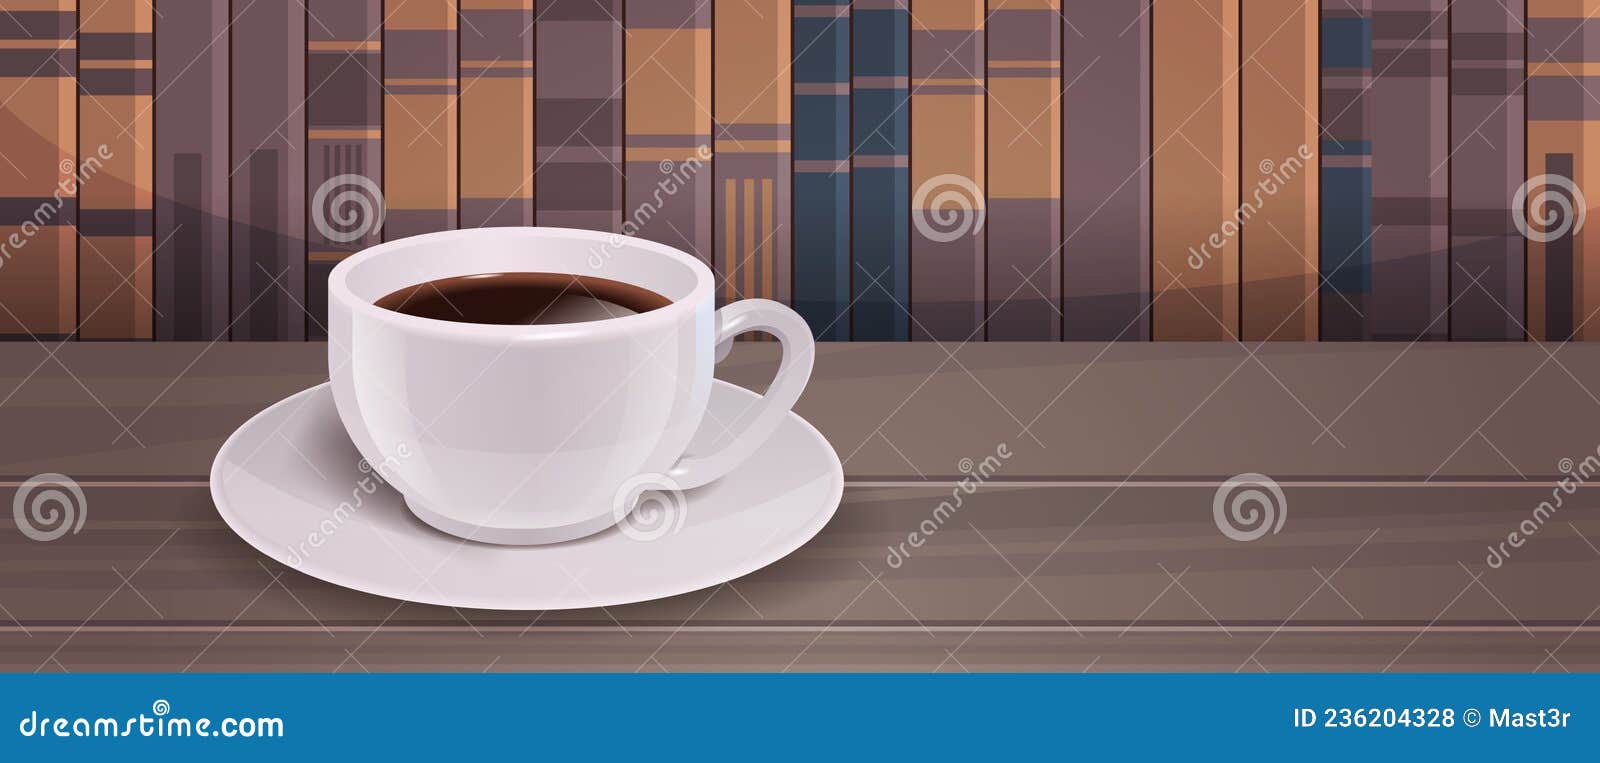 realistic coffee in white cup on cafe table hot americano drink